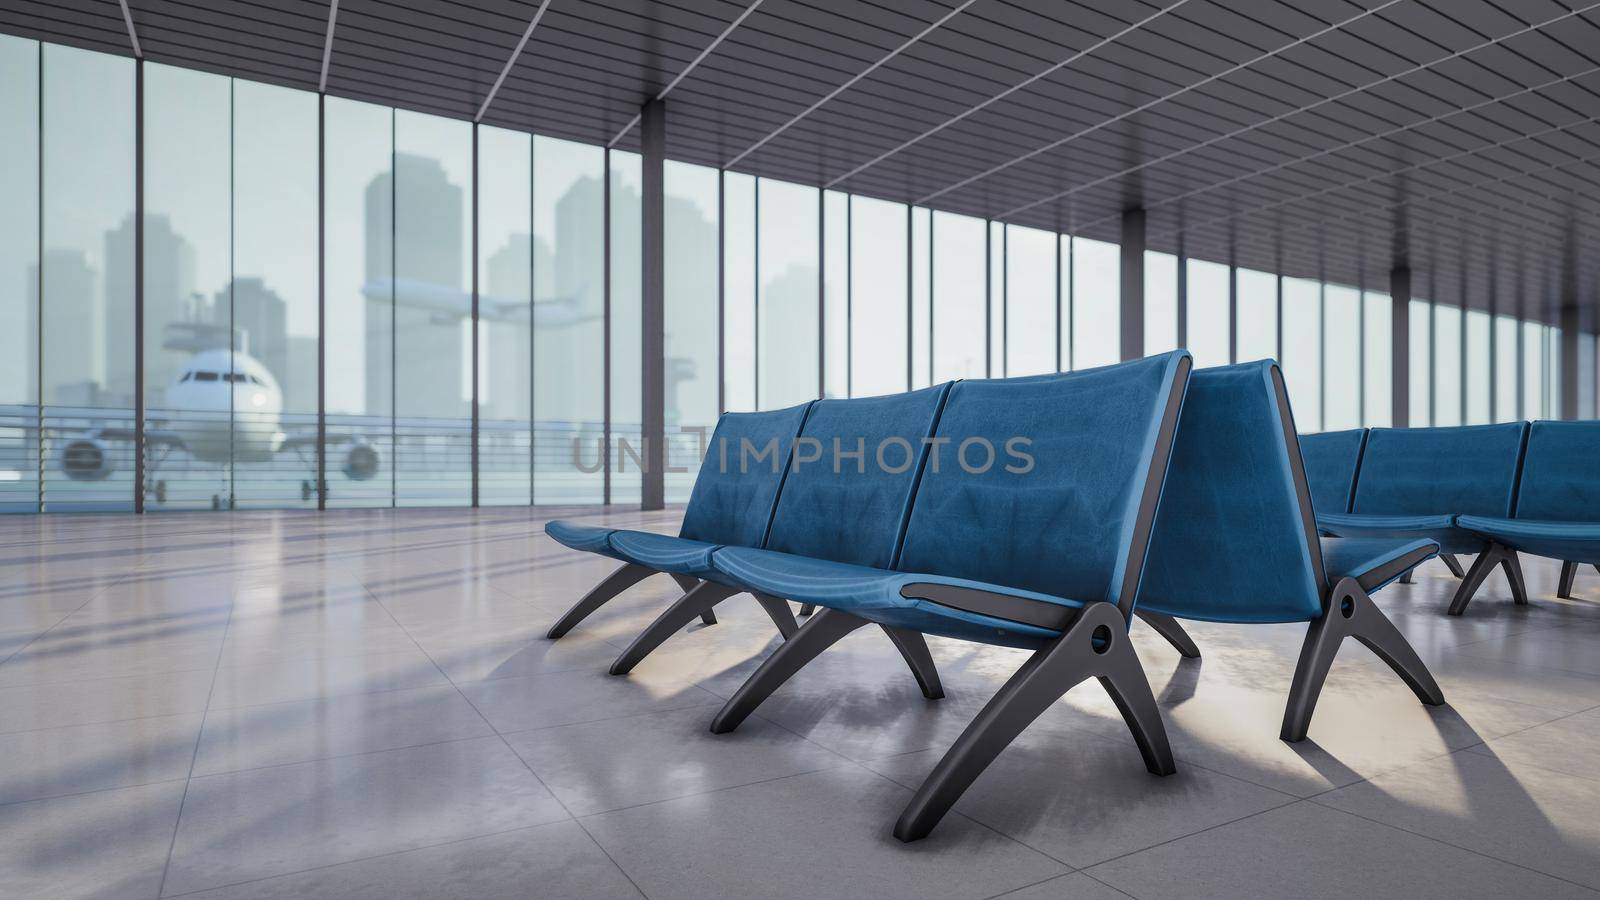 3D rendering illustration of passenger seat in airport waiting area by Arissuu1